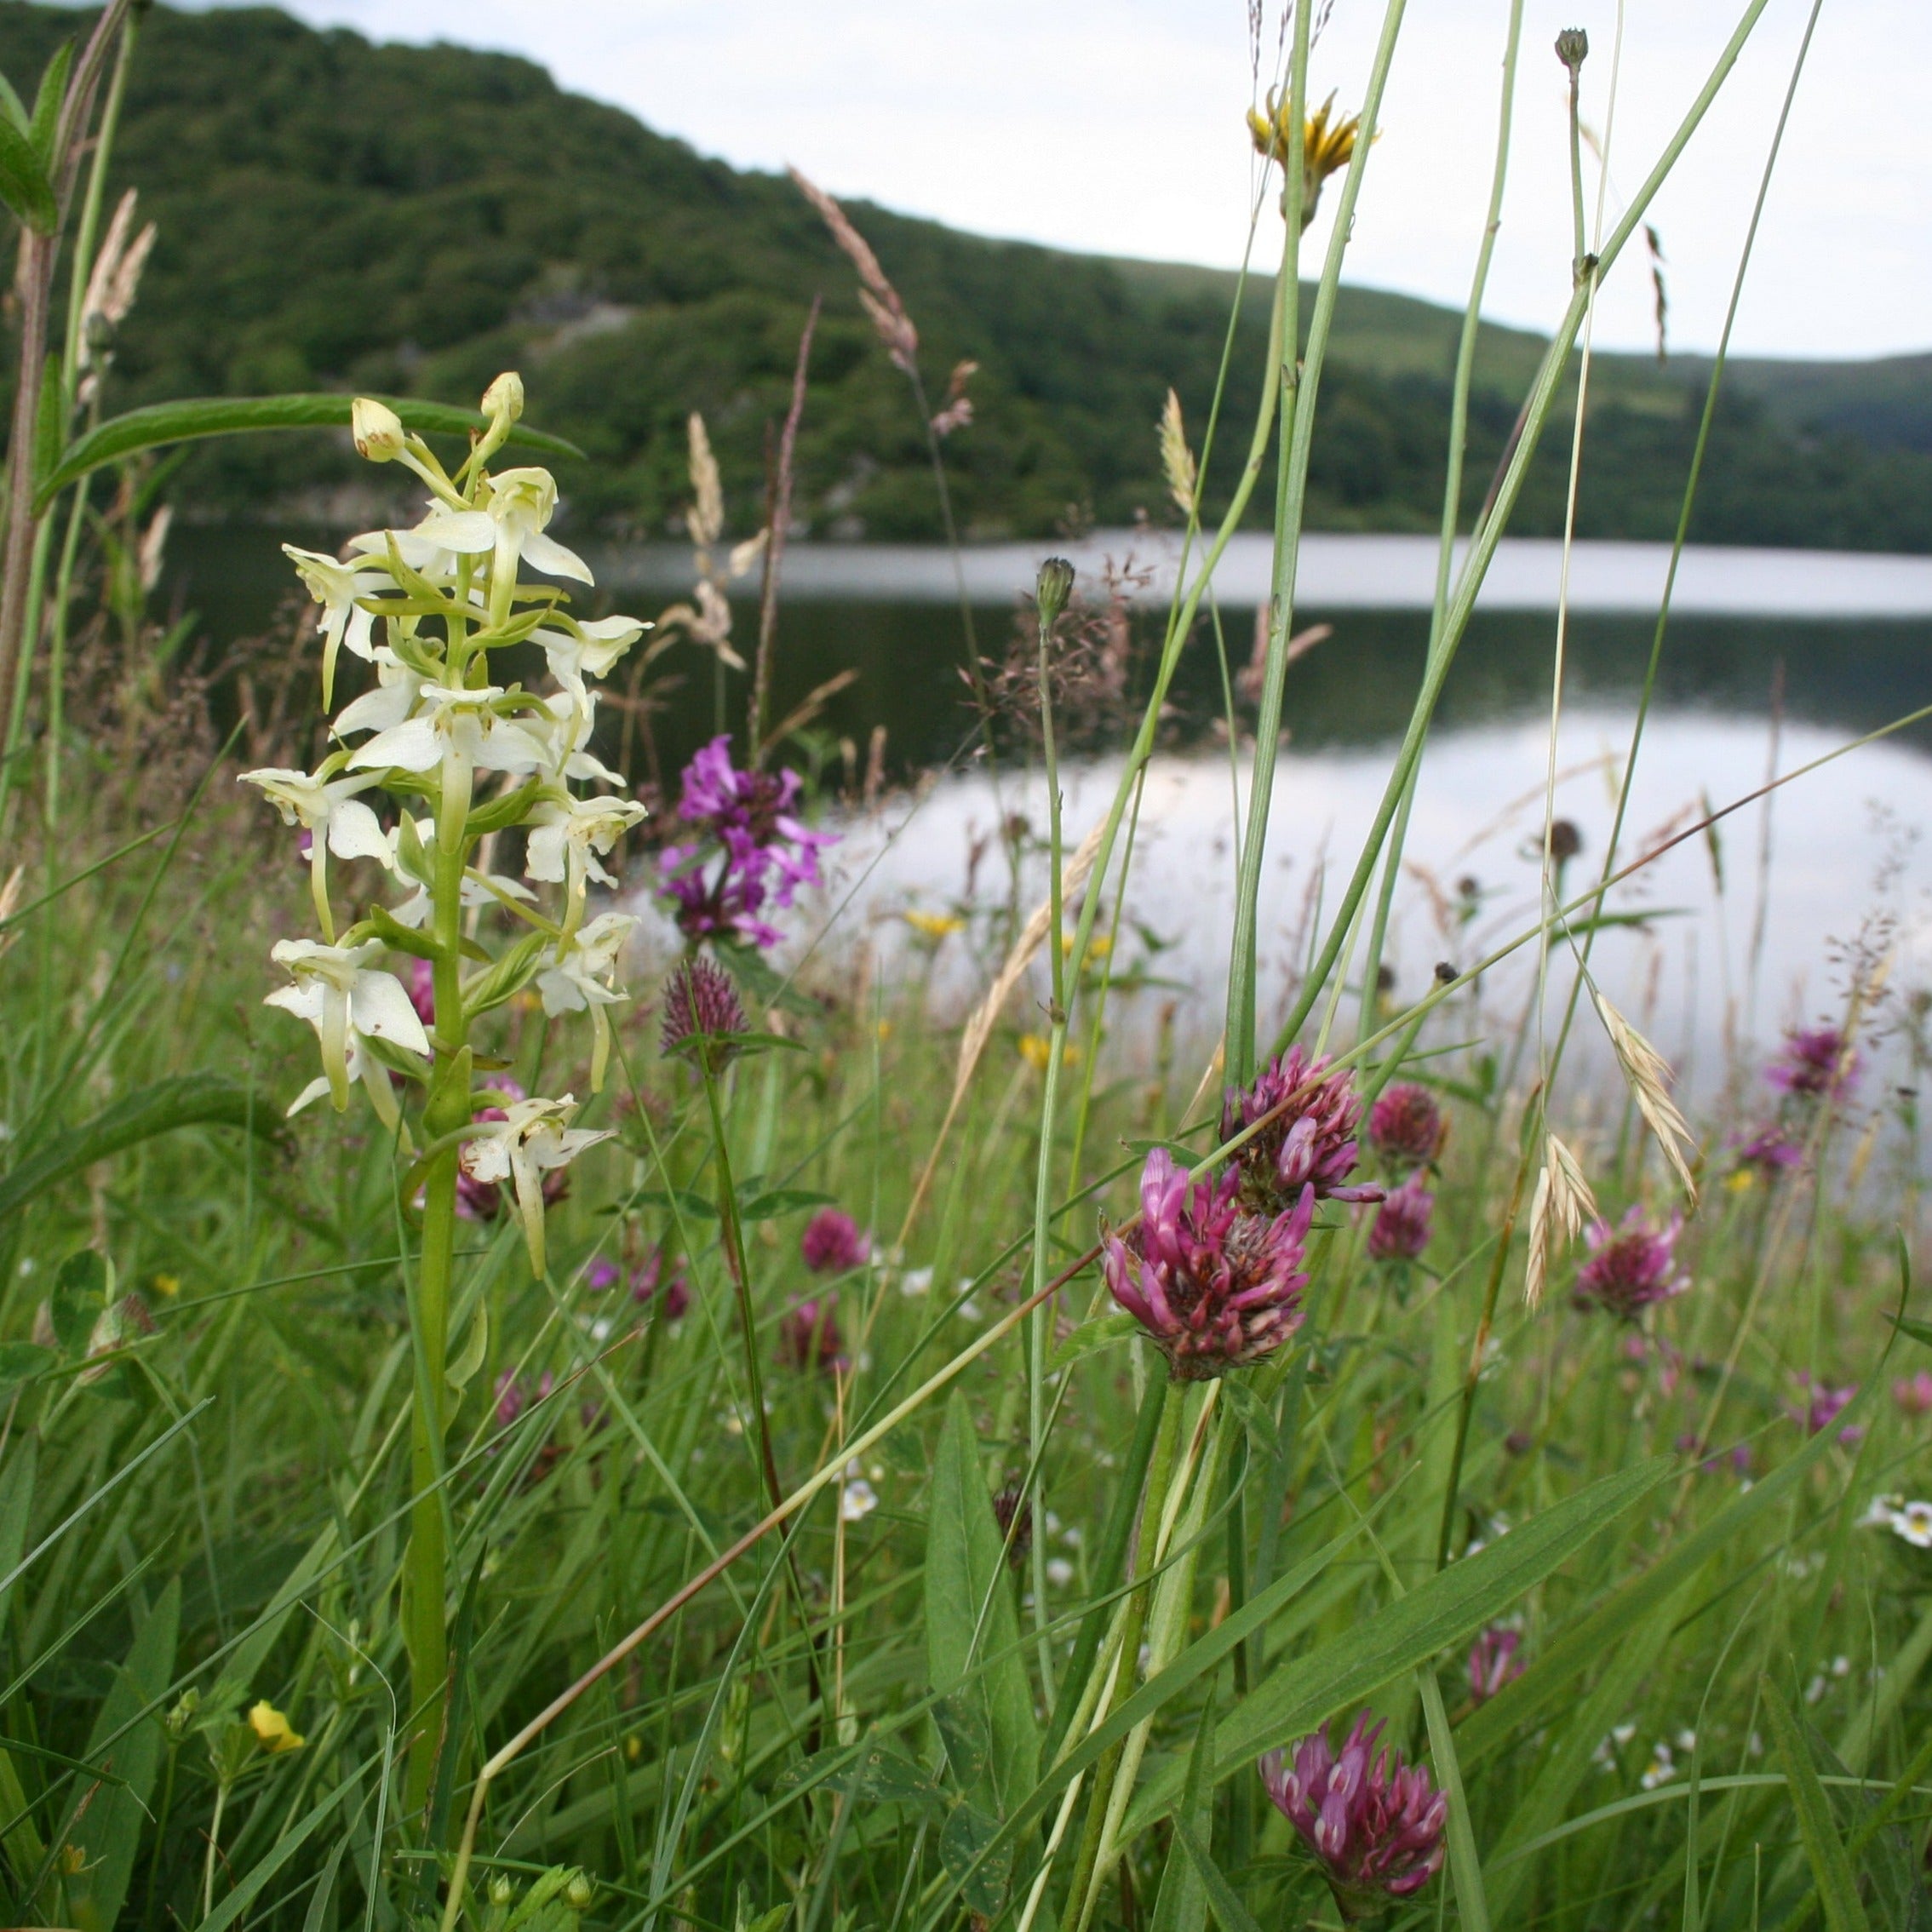 Adopt a flower - Greater butterfly orchid